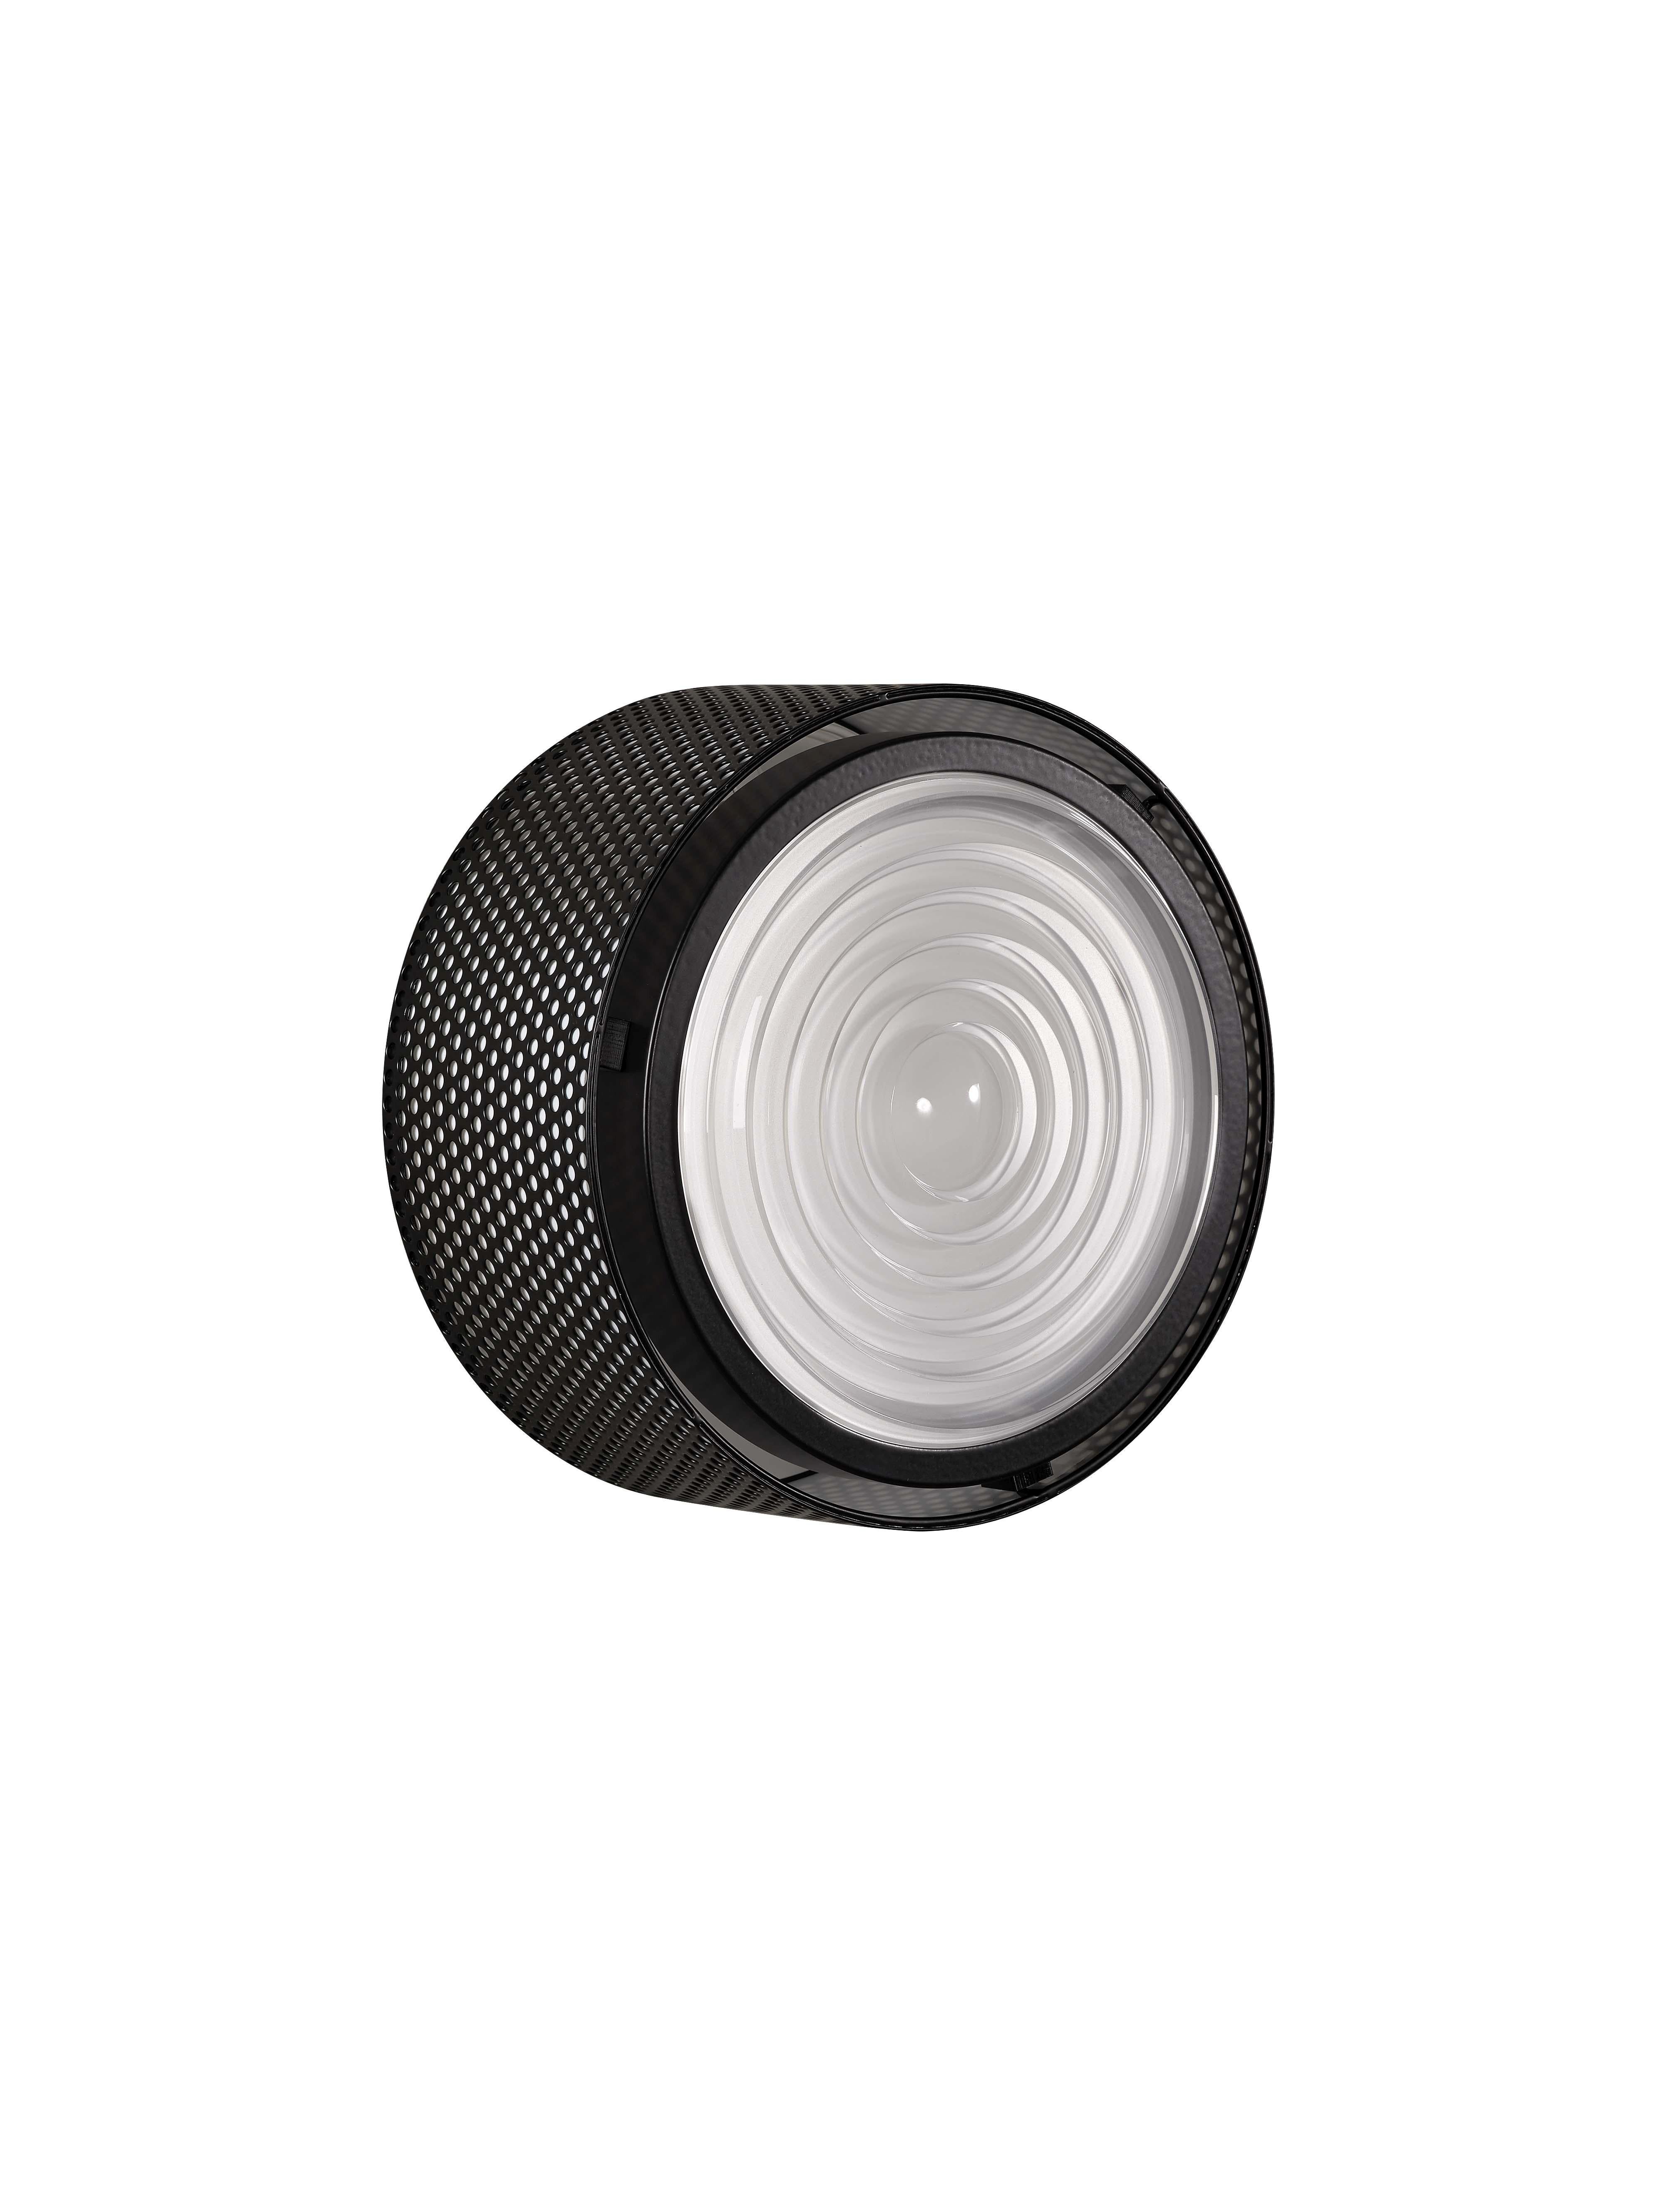 Pierre Guariche 'G13' Wall or Ceiling Light for Sammode Studio in Black For Sale 1